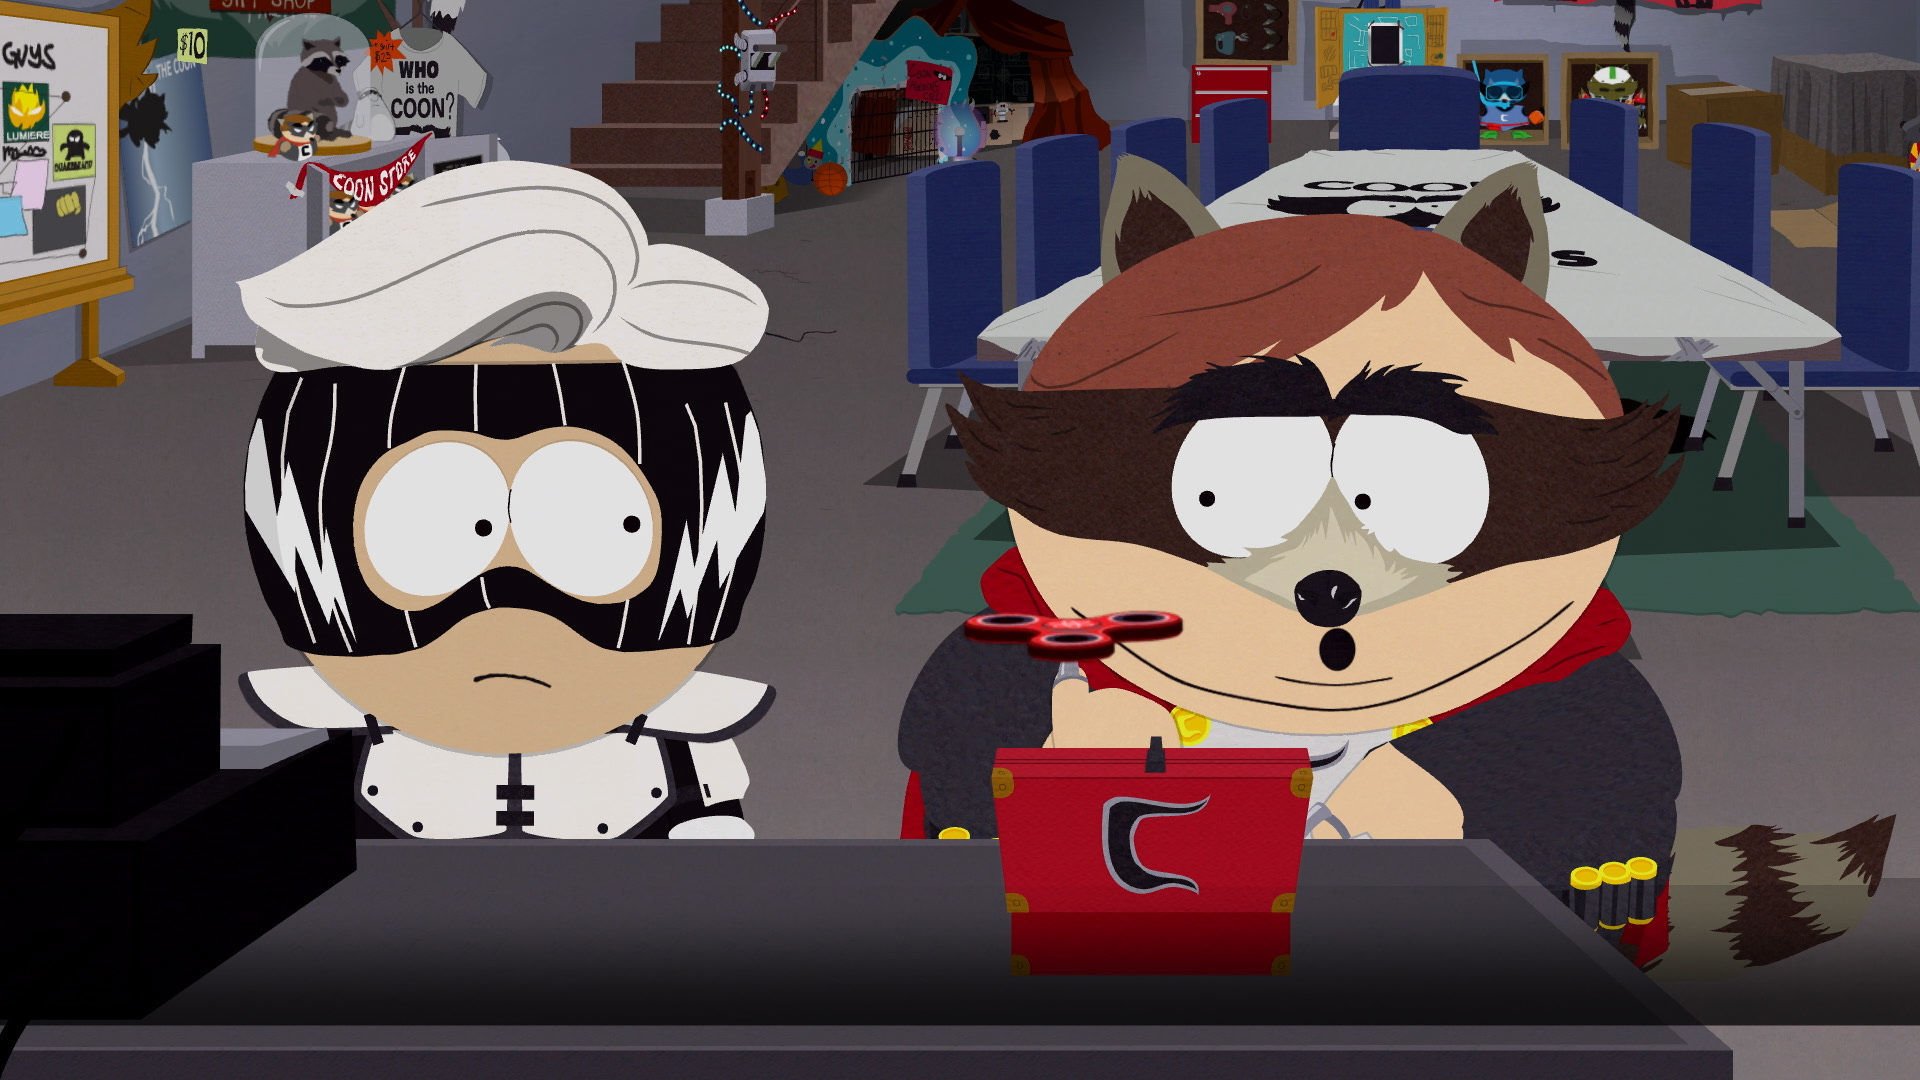 south park the fractured but whole gendering